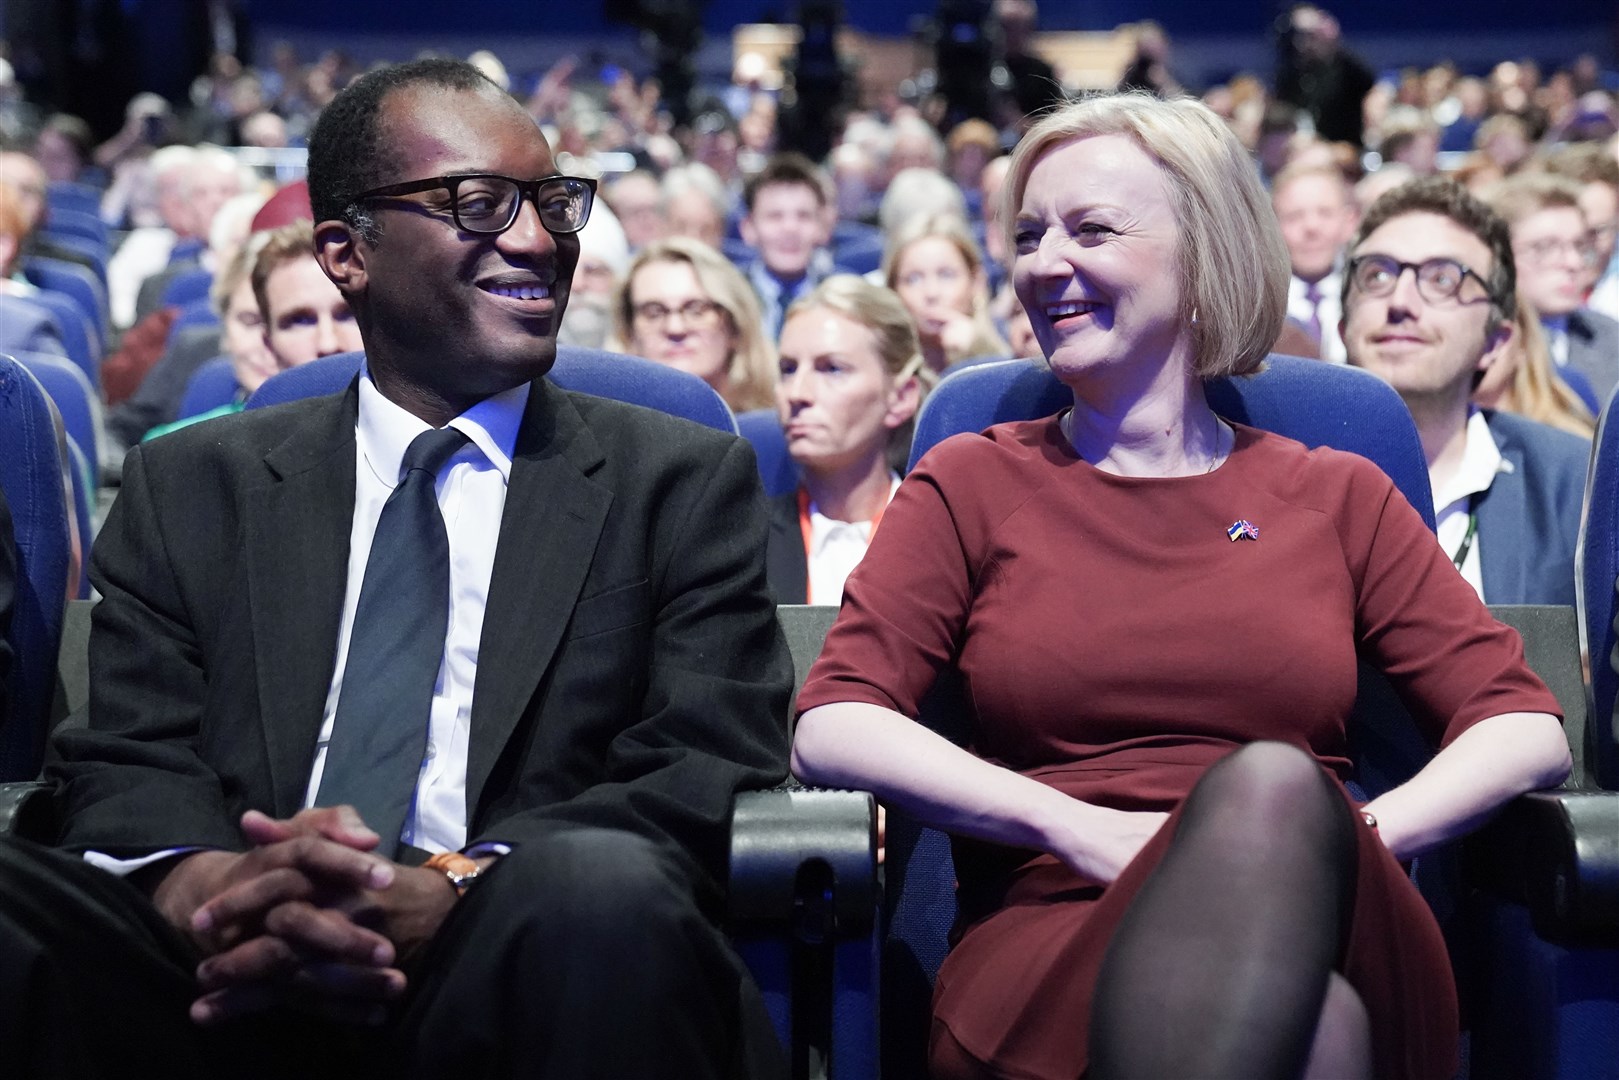 Liz Truss and Kwasi Kwarteng at the Conservative Party conference (Stefan Rousseau/PA)